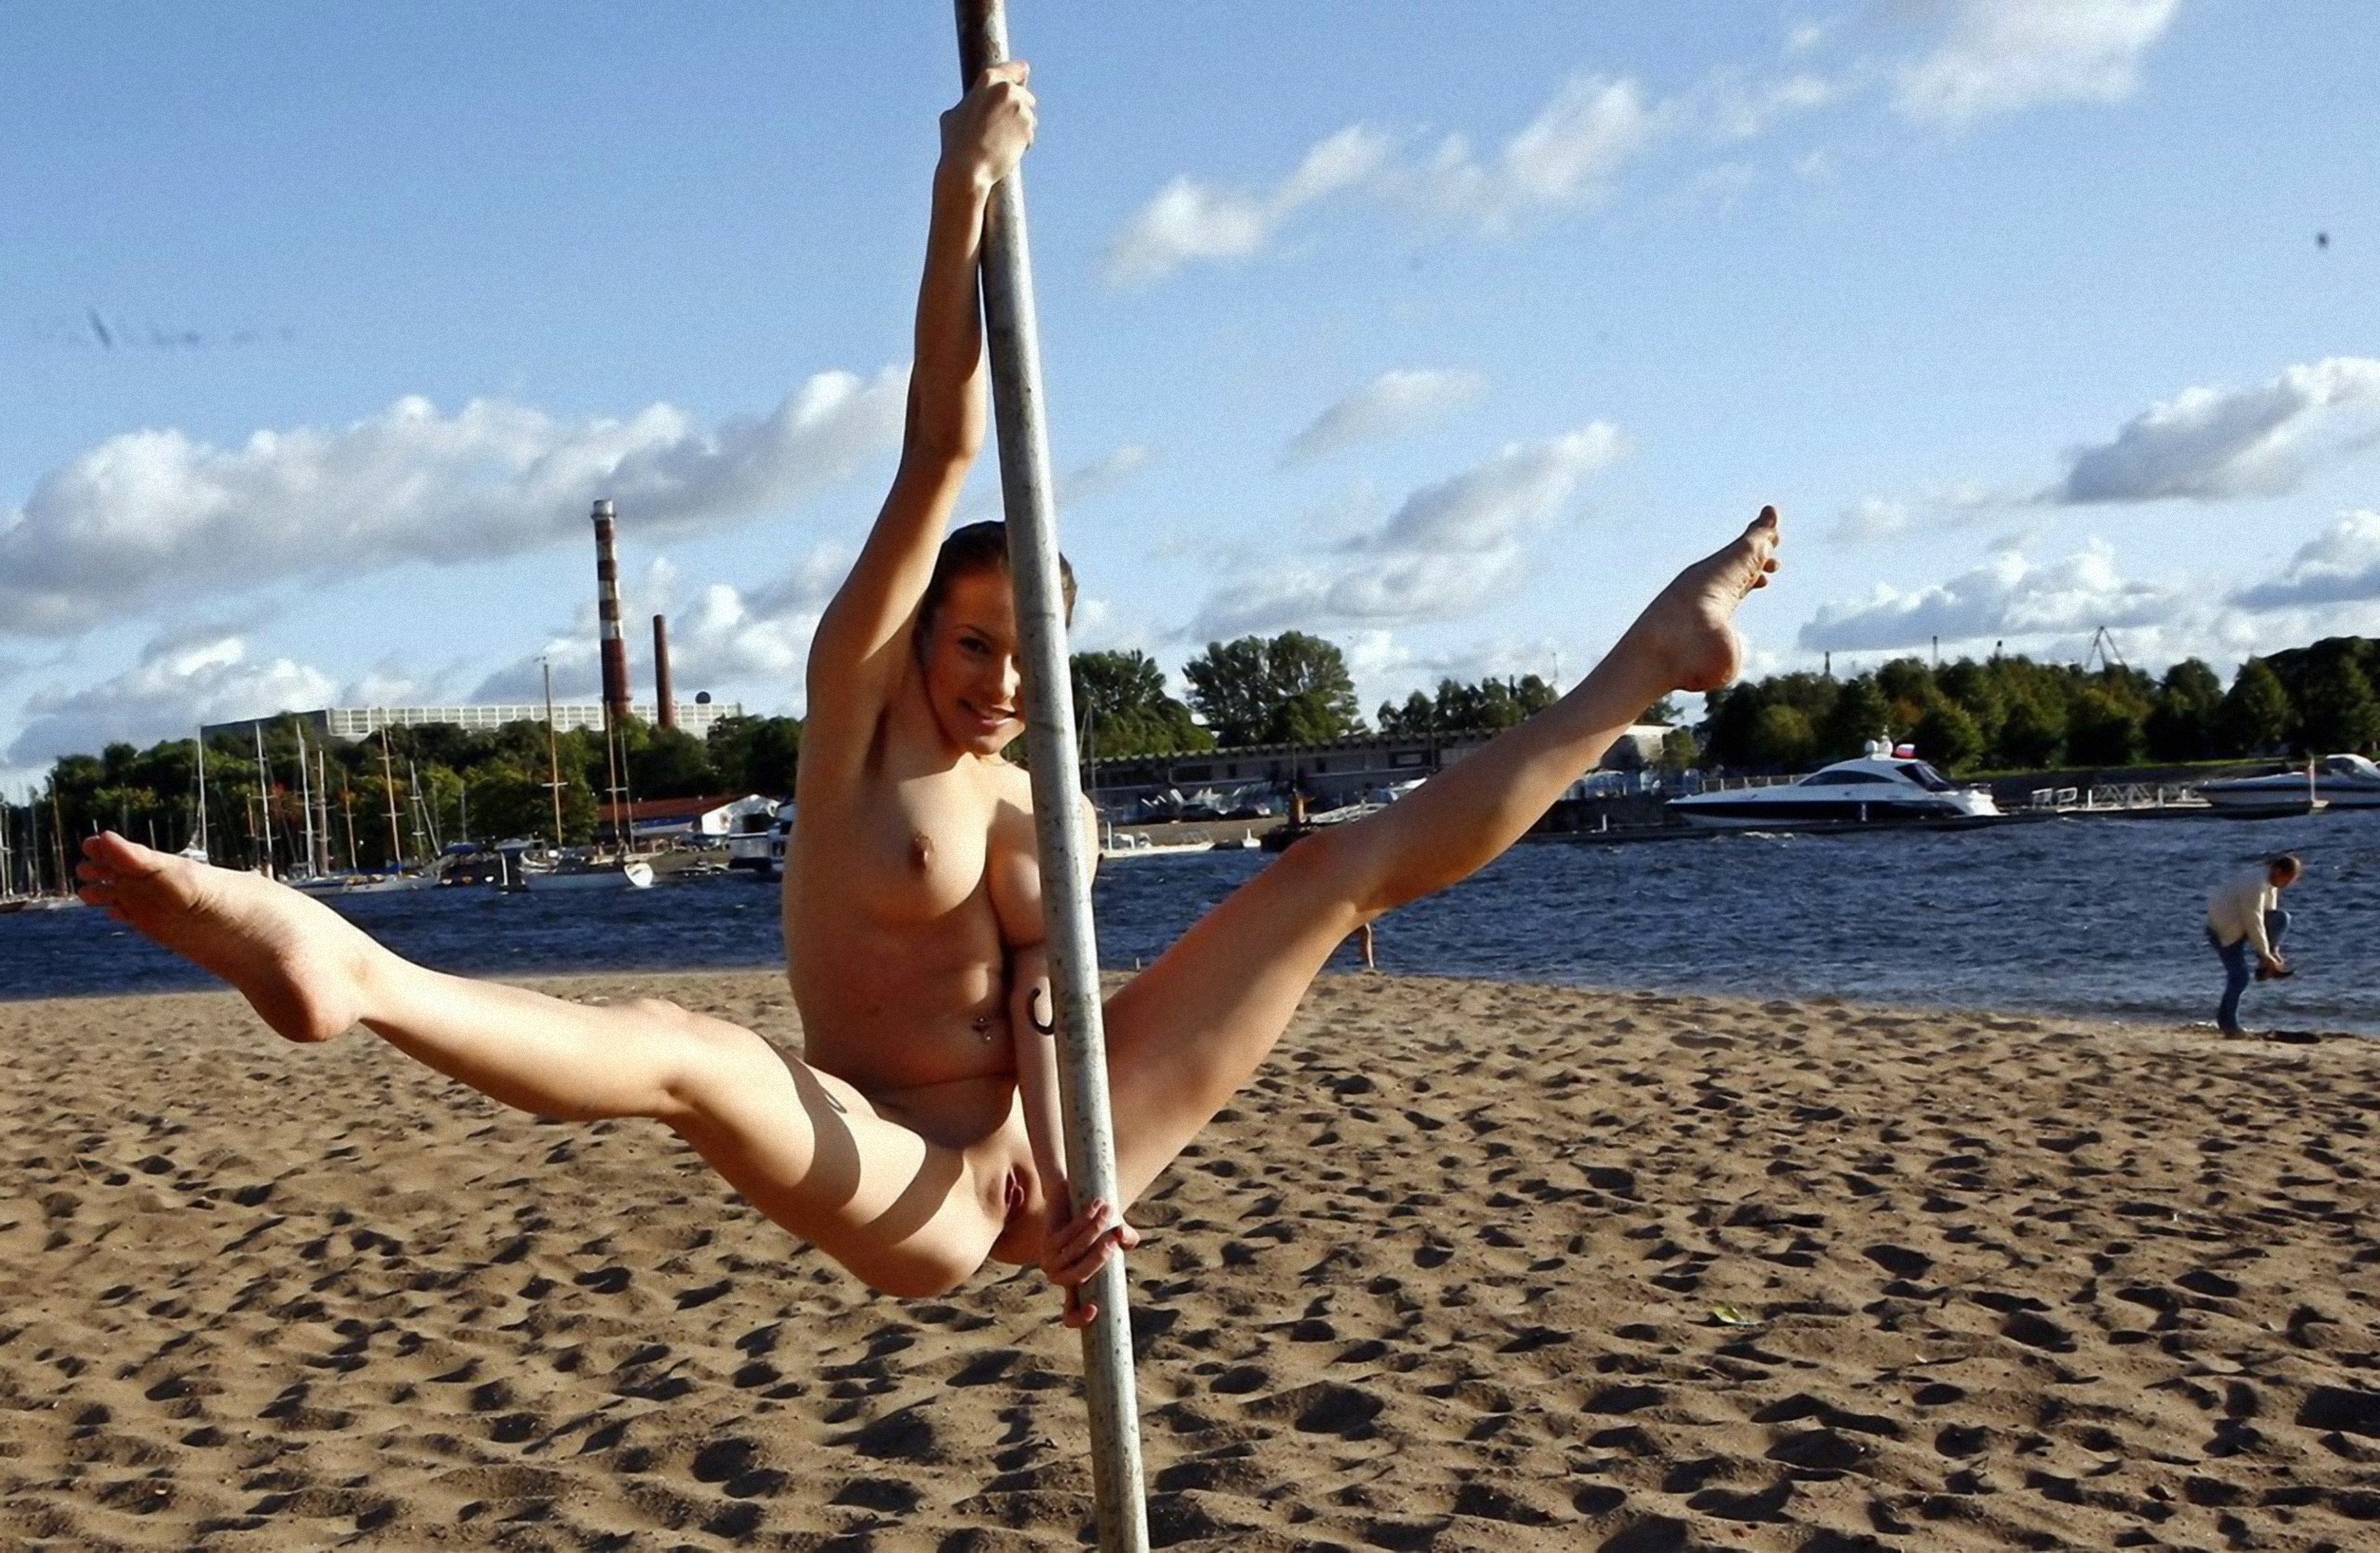 Female Wieghtlifting Nude Porn Pictures On Pole